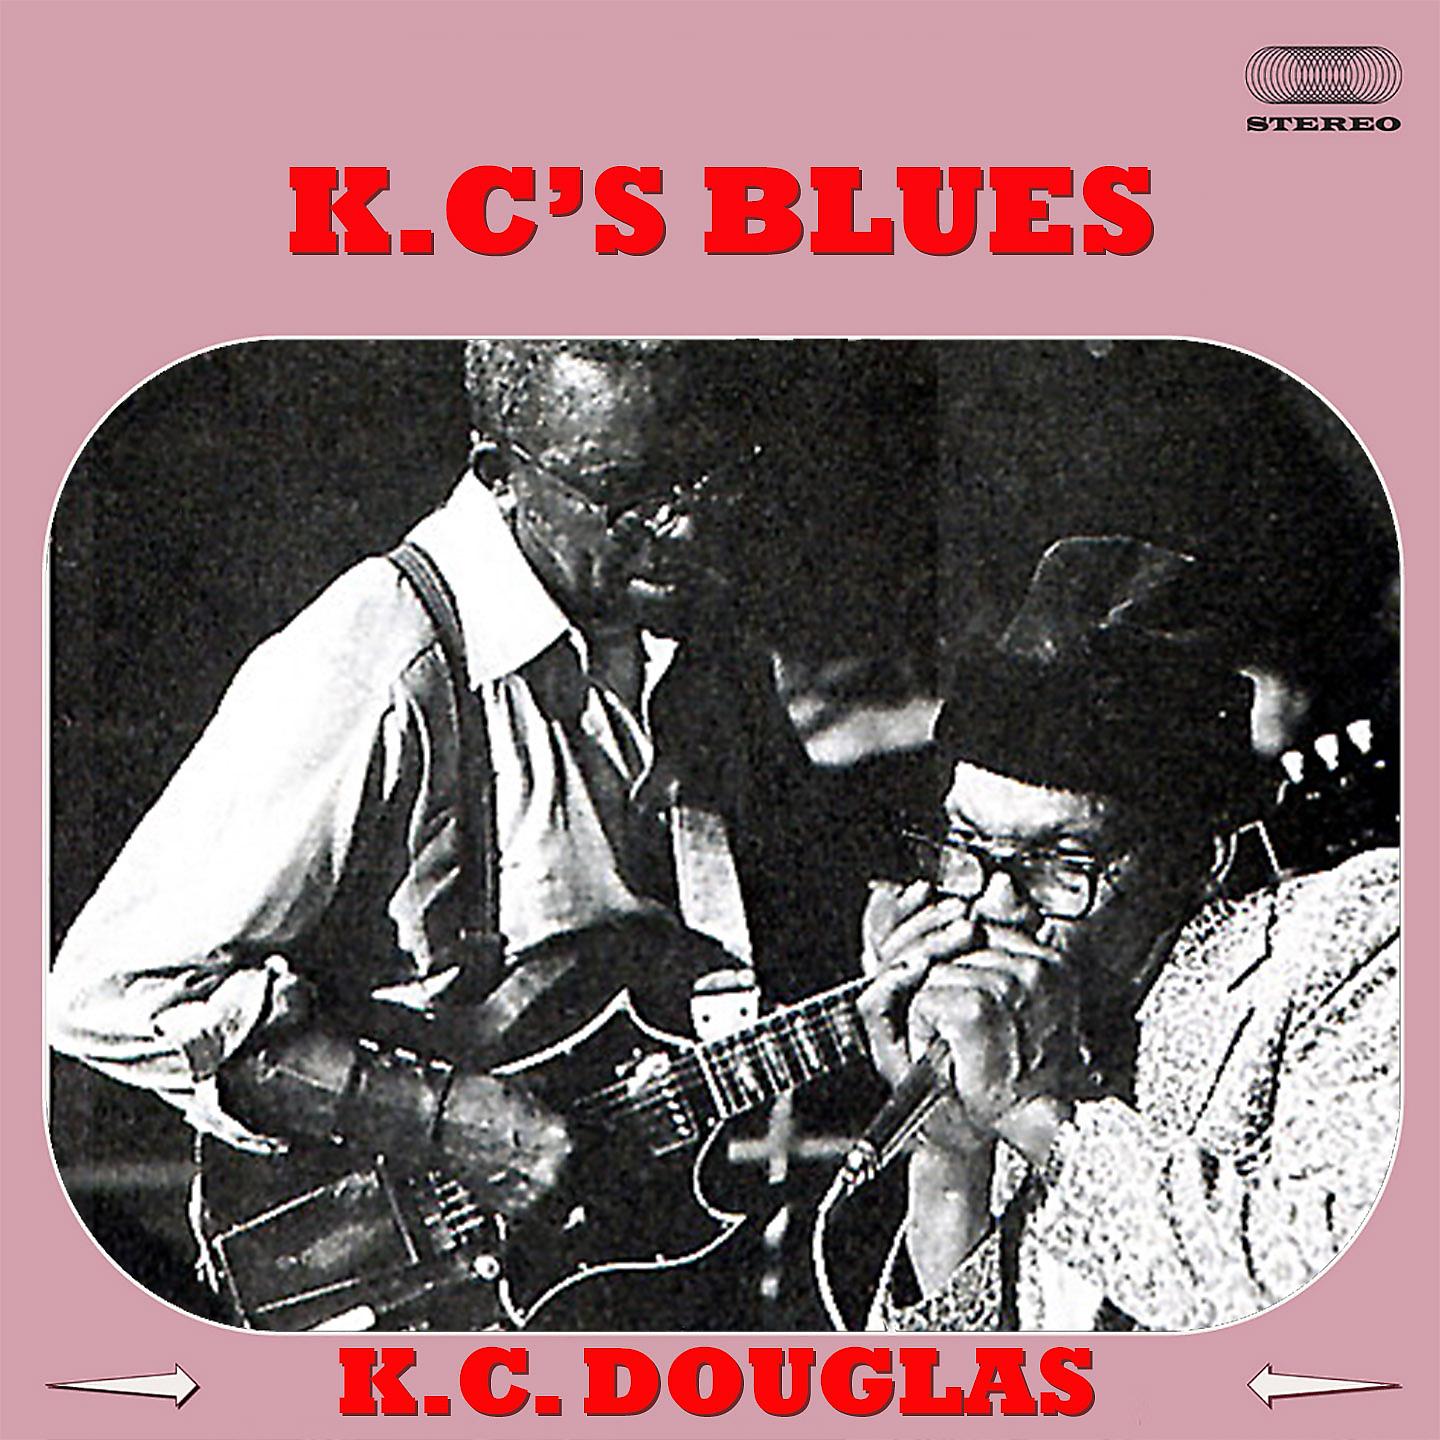 Постер альбома K. C.'s Blues Medley: Broken Heart / Hen House Blues / Wake Up, Workin' Woman / Rootin' Ground Hog / Meanest Woman / Born In The Country / Love Me All Night Long / Tell Me / No More Cryin' / K.C.'s Doctor Blues / You Got A Good Thing Now / Watch Dog Blues